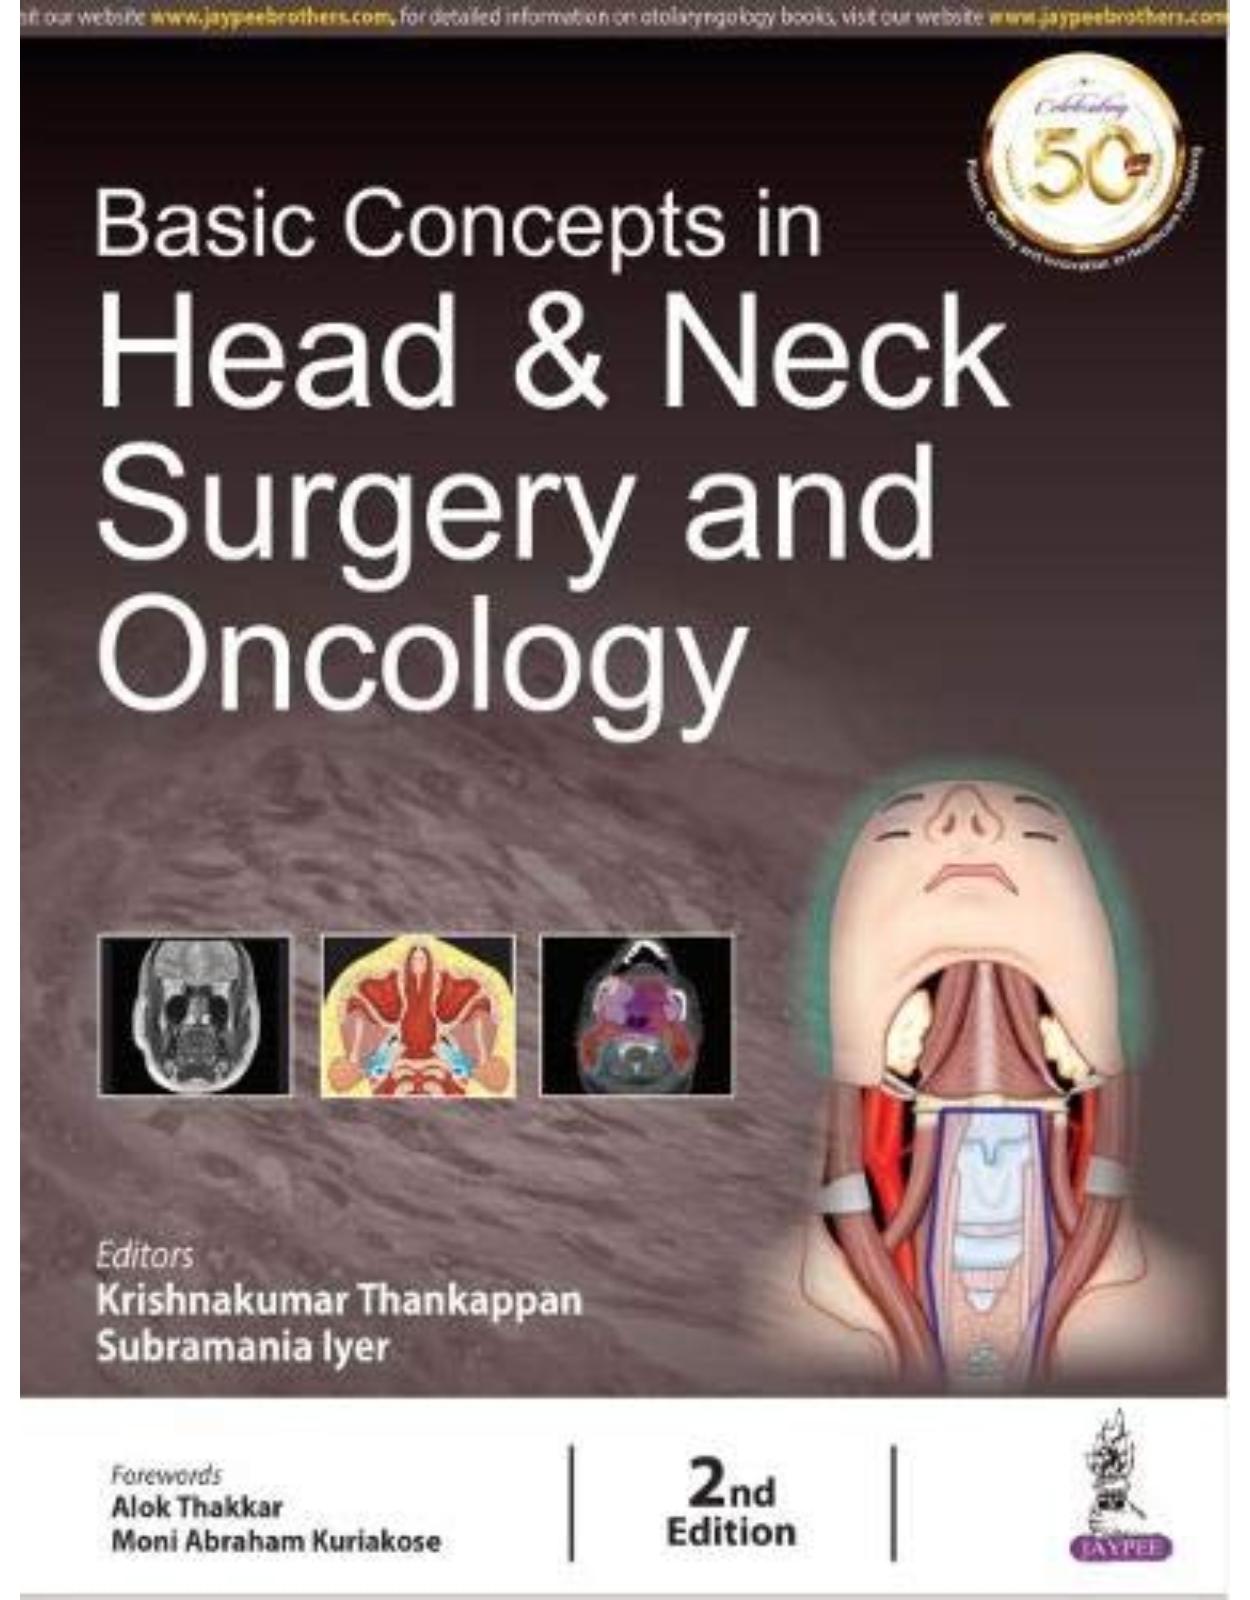 Basic Concepts in Head & Neck Surgery and Oncology